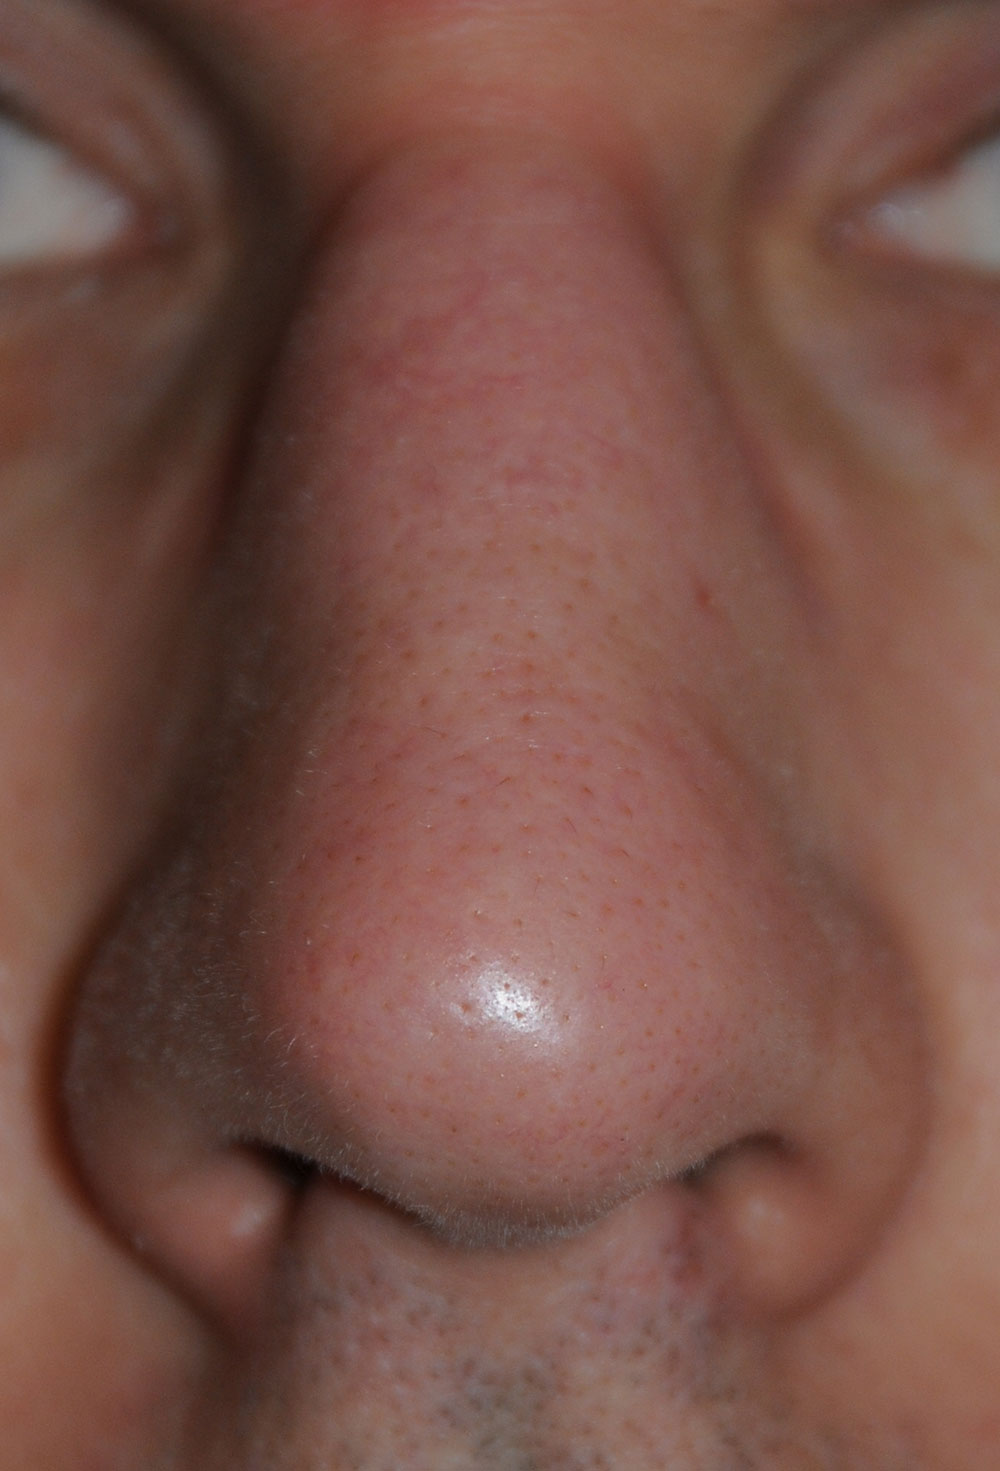 Nose laser resurfacing & scar revision before photo from Dr Philip Young in Beleveu Washington